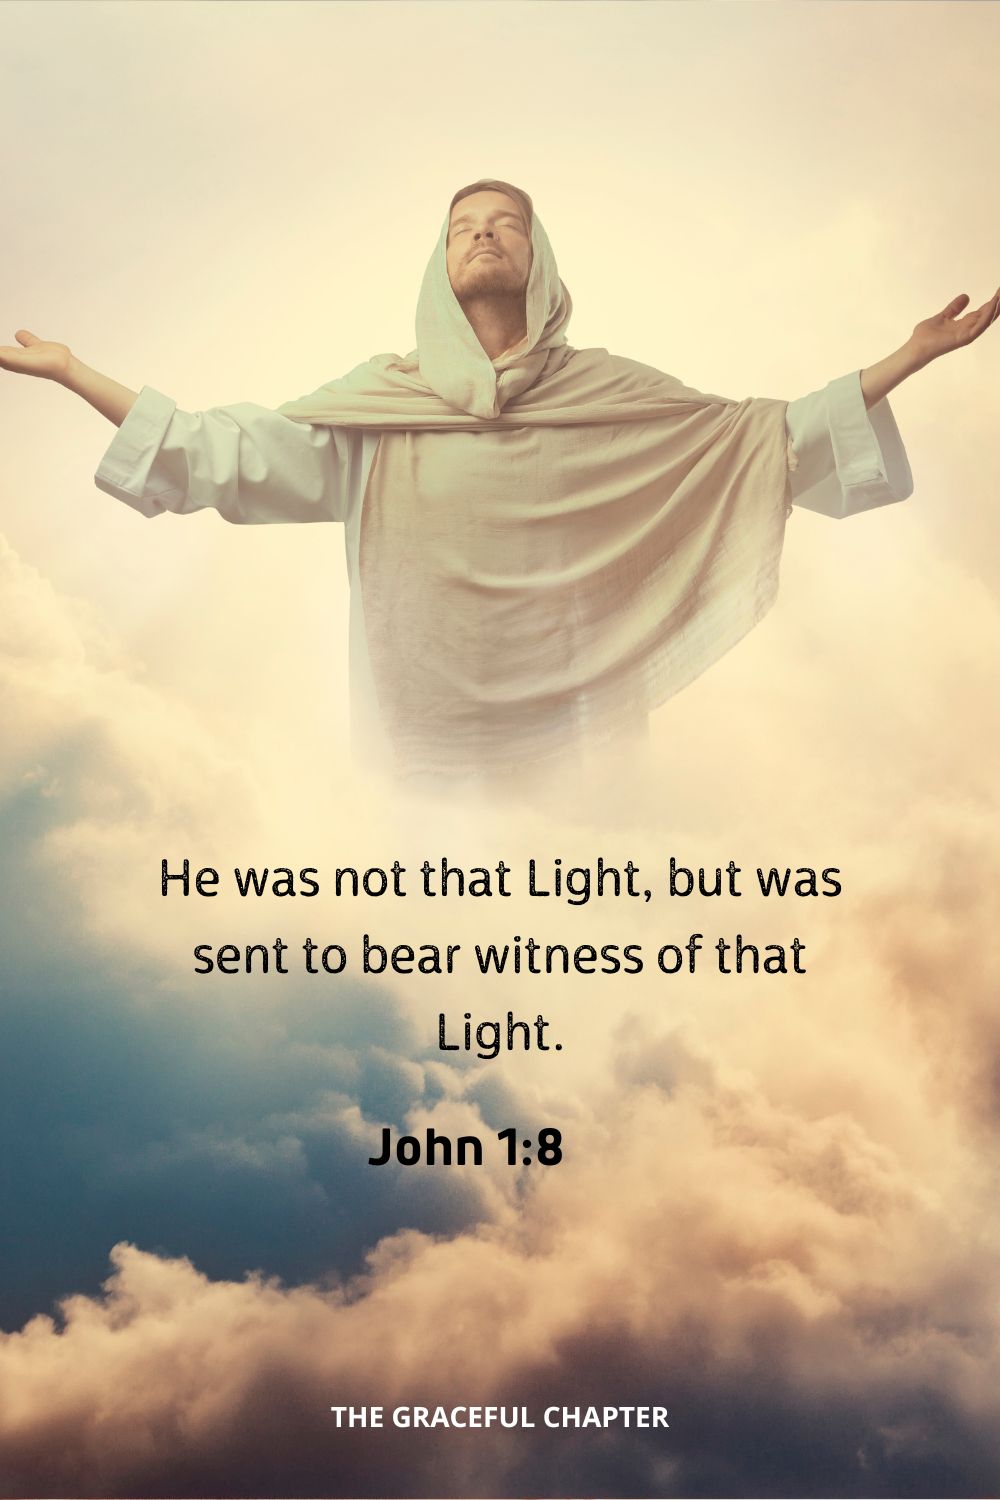 He was not that Light, but was sent to bear witness of that Light.